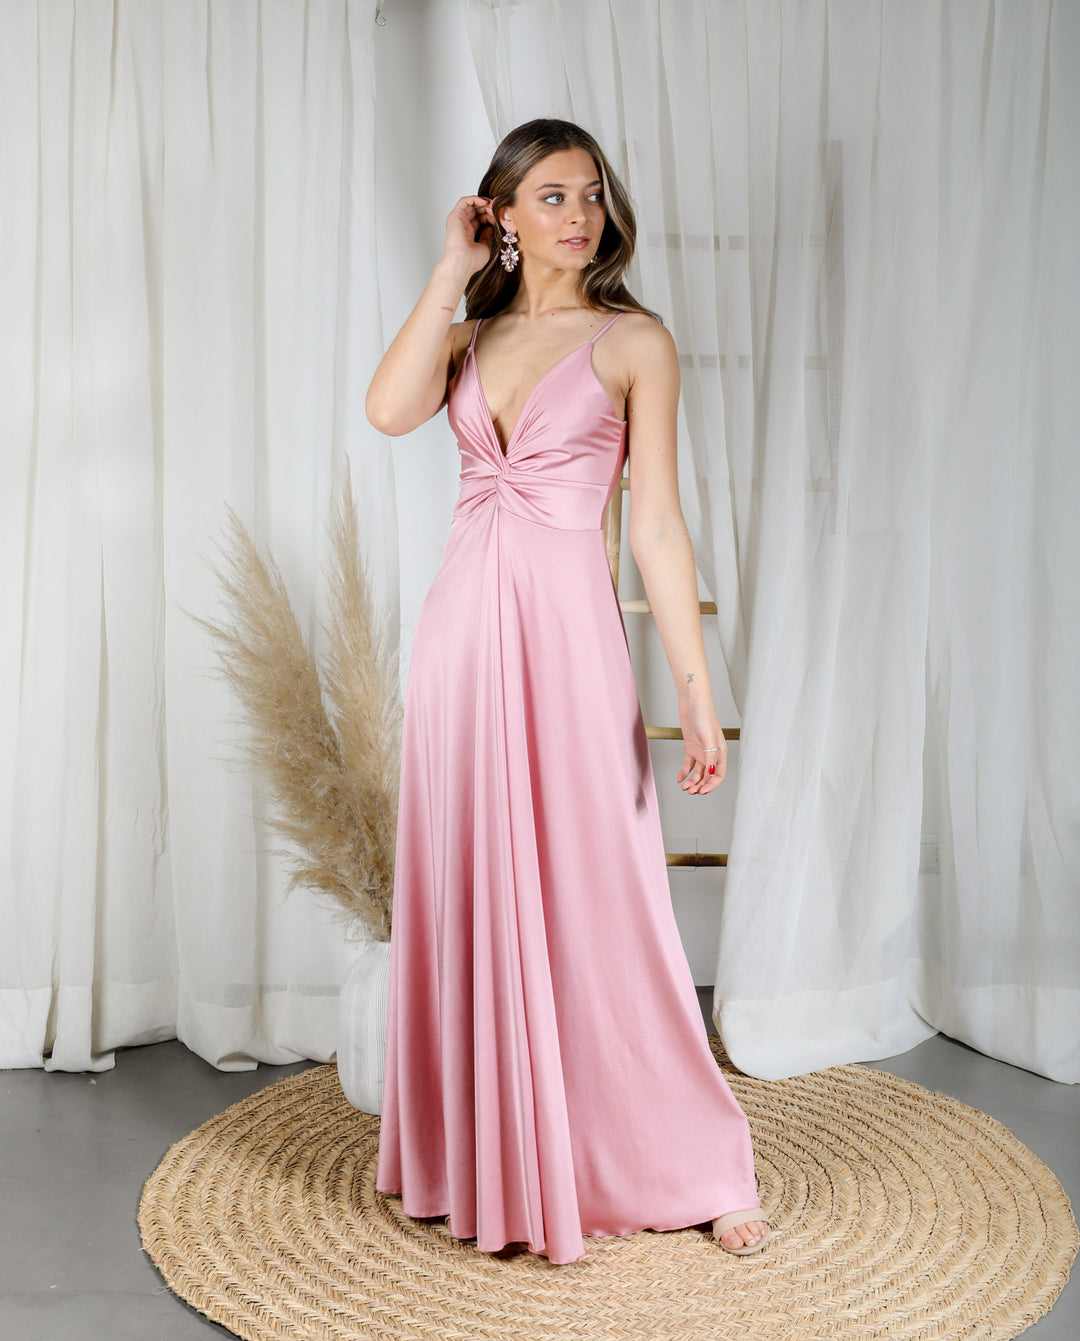 LONG PARTY DRESS WITH PINK KNOT